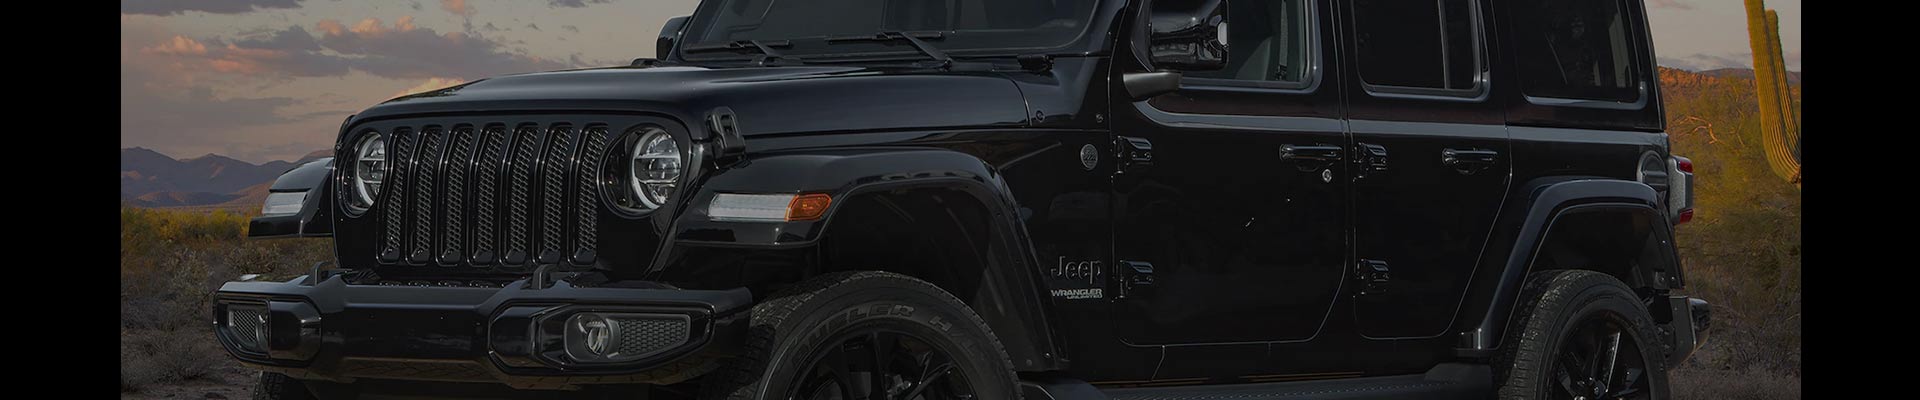 Shop Replacement and OEM 1999 Jeep Wrangler Parts with Discounted Price on the Net